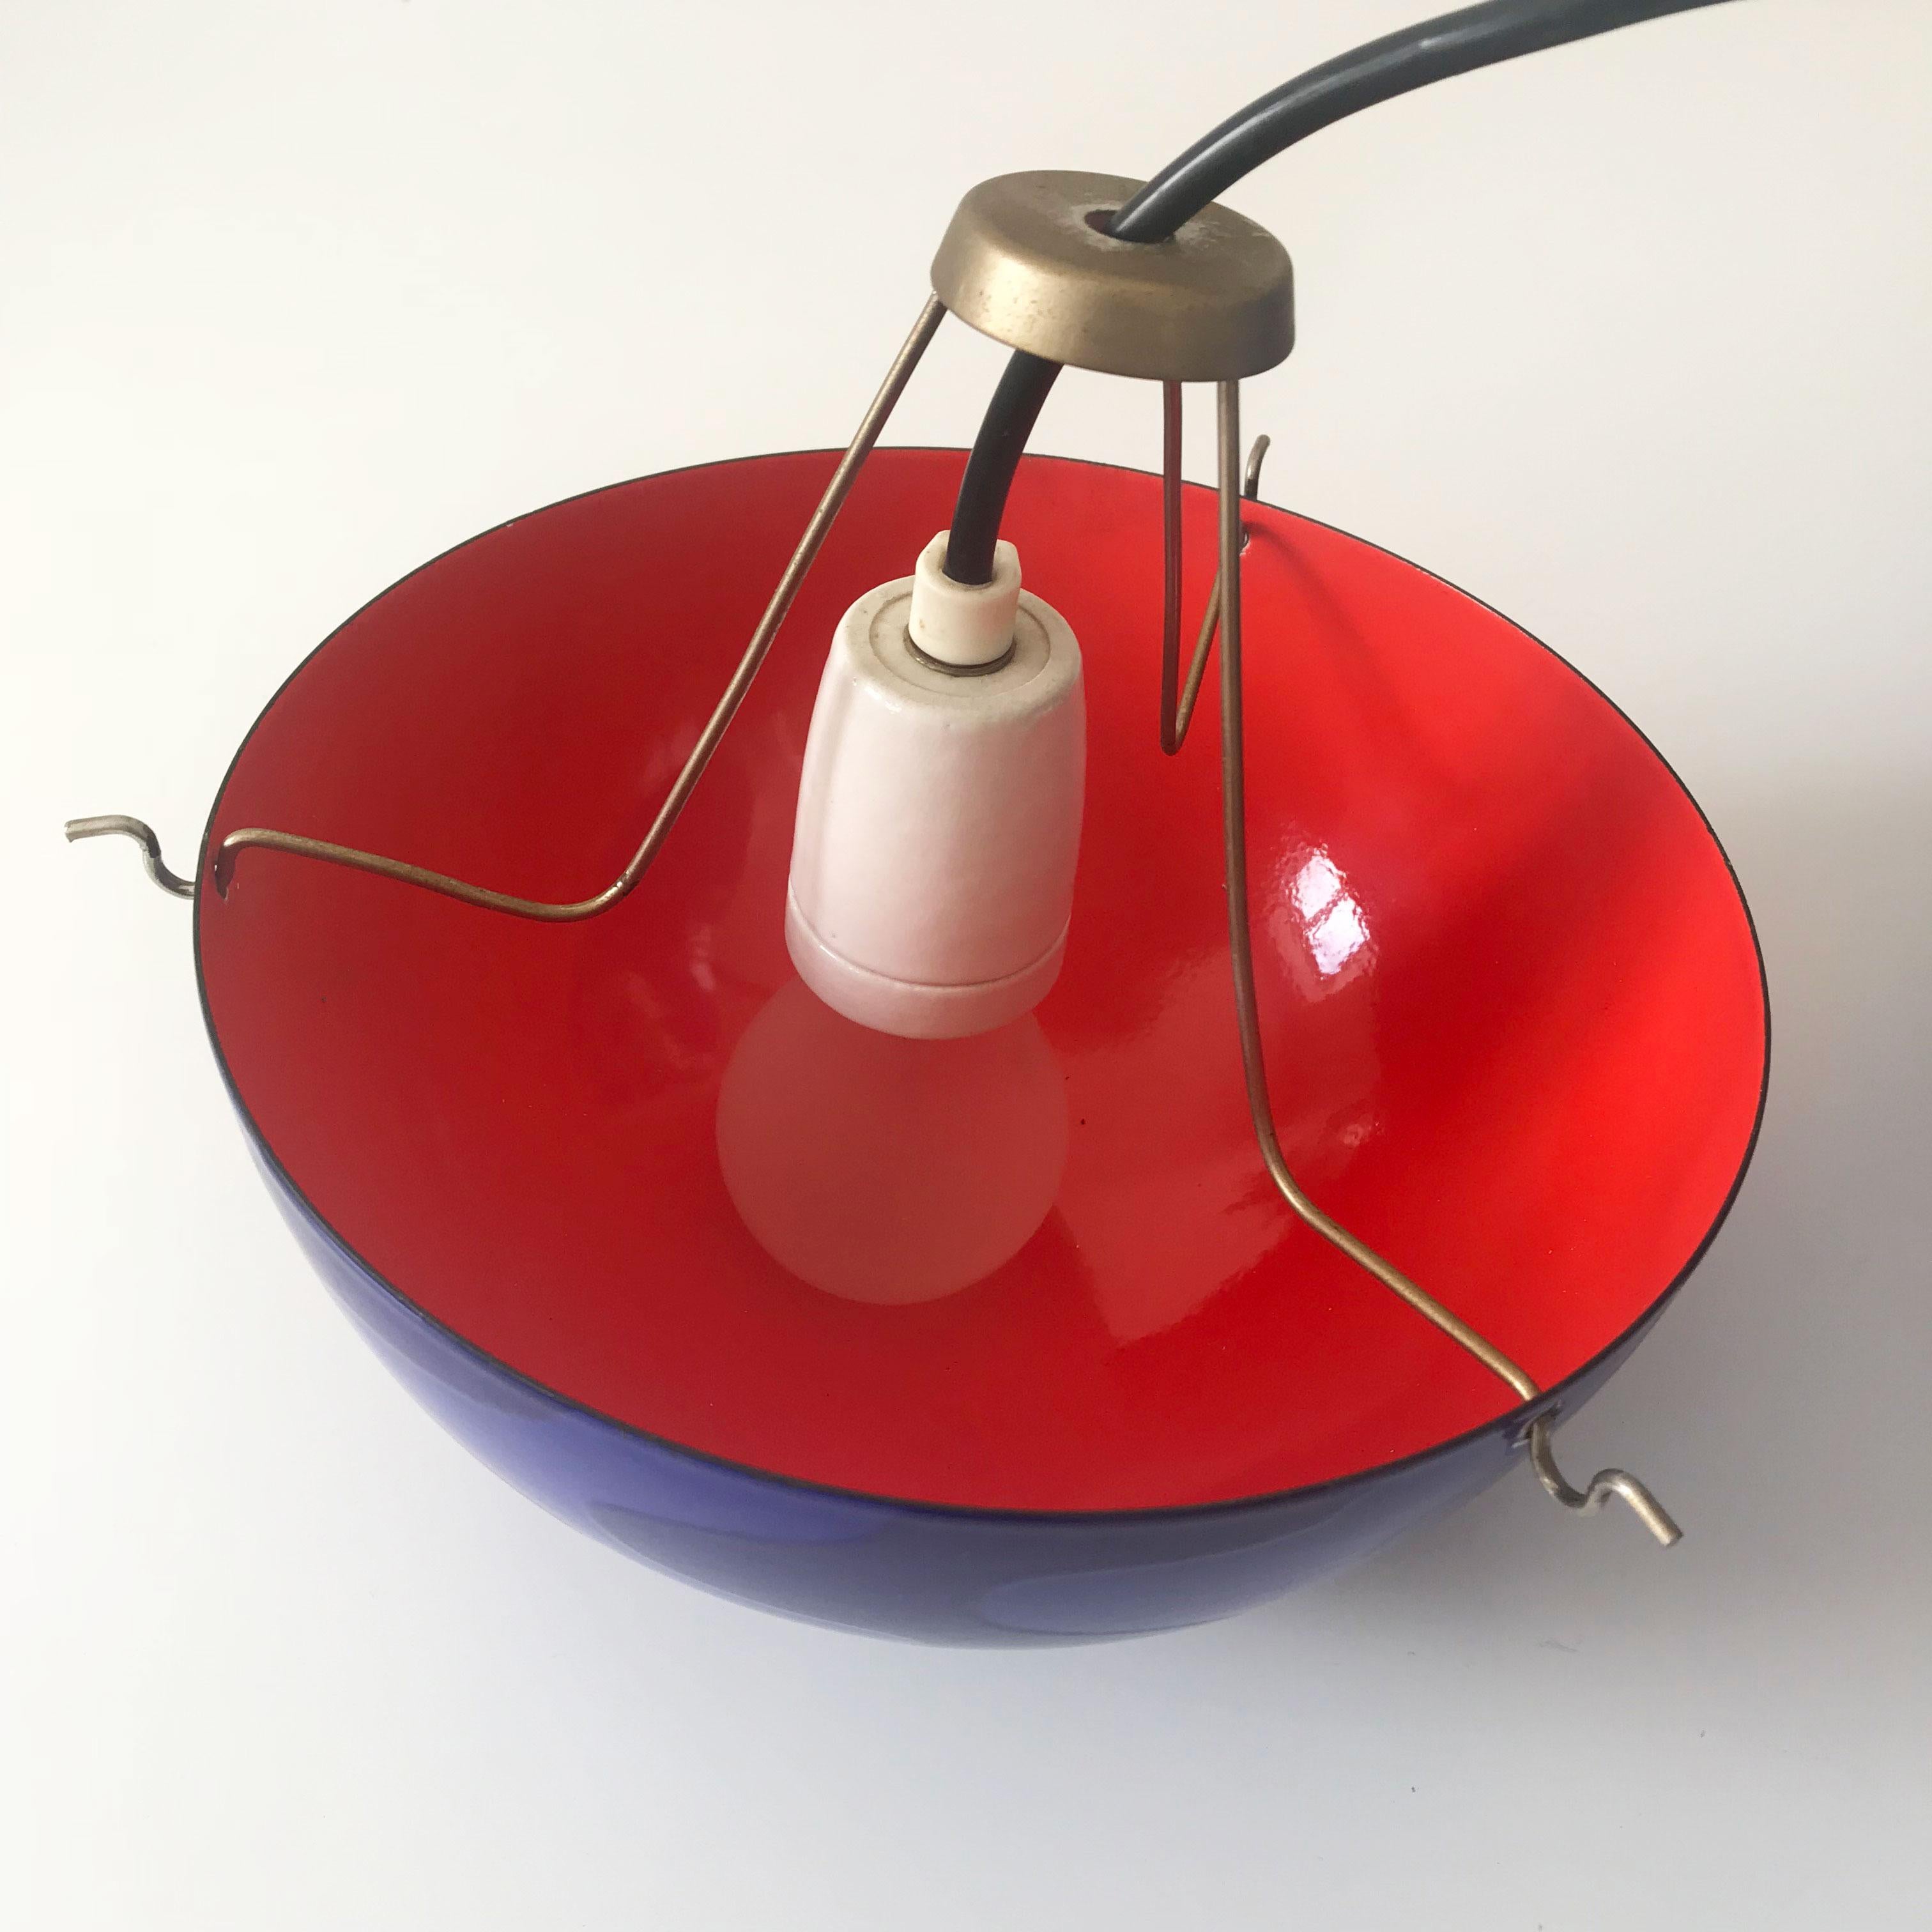 Rare and Large Flower Pot Pendant Lamp by Verner Panton for Louis Poulsen 1971 For Sale 5